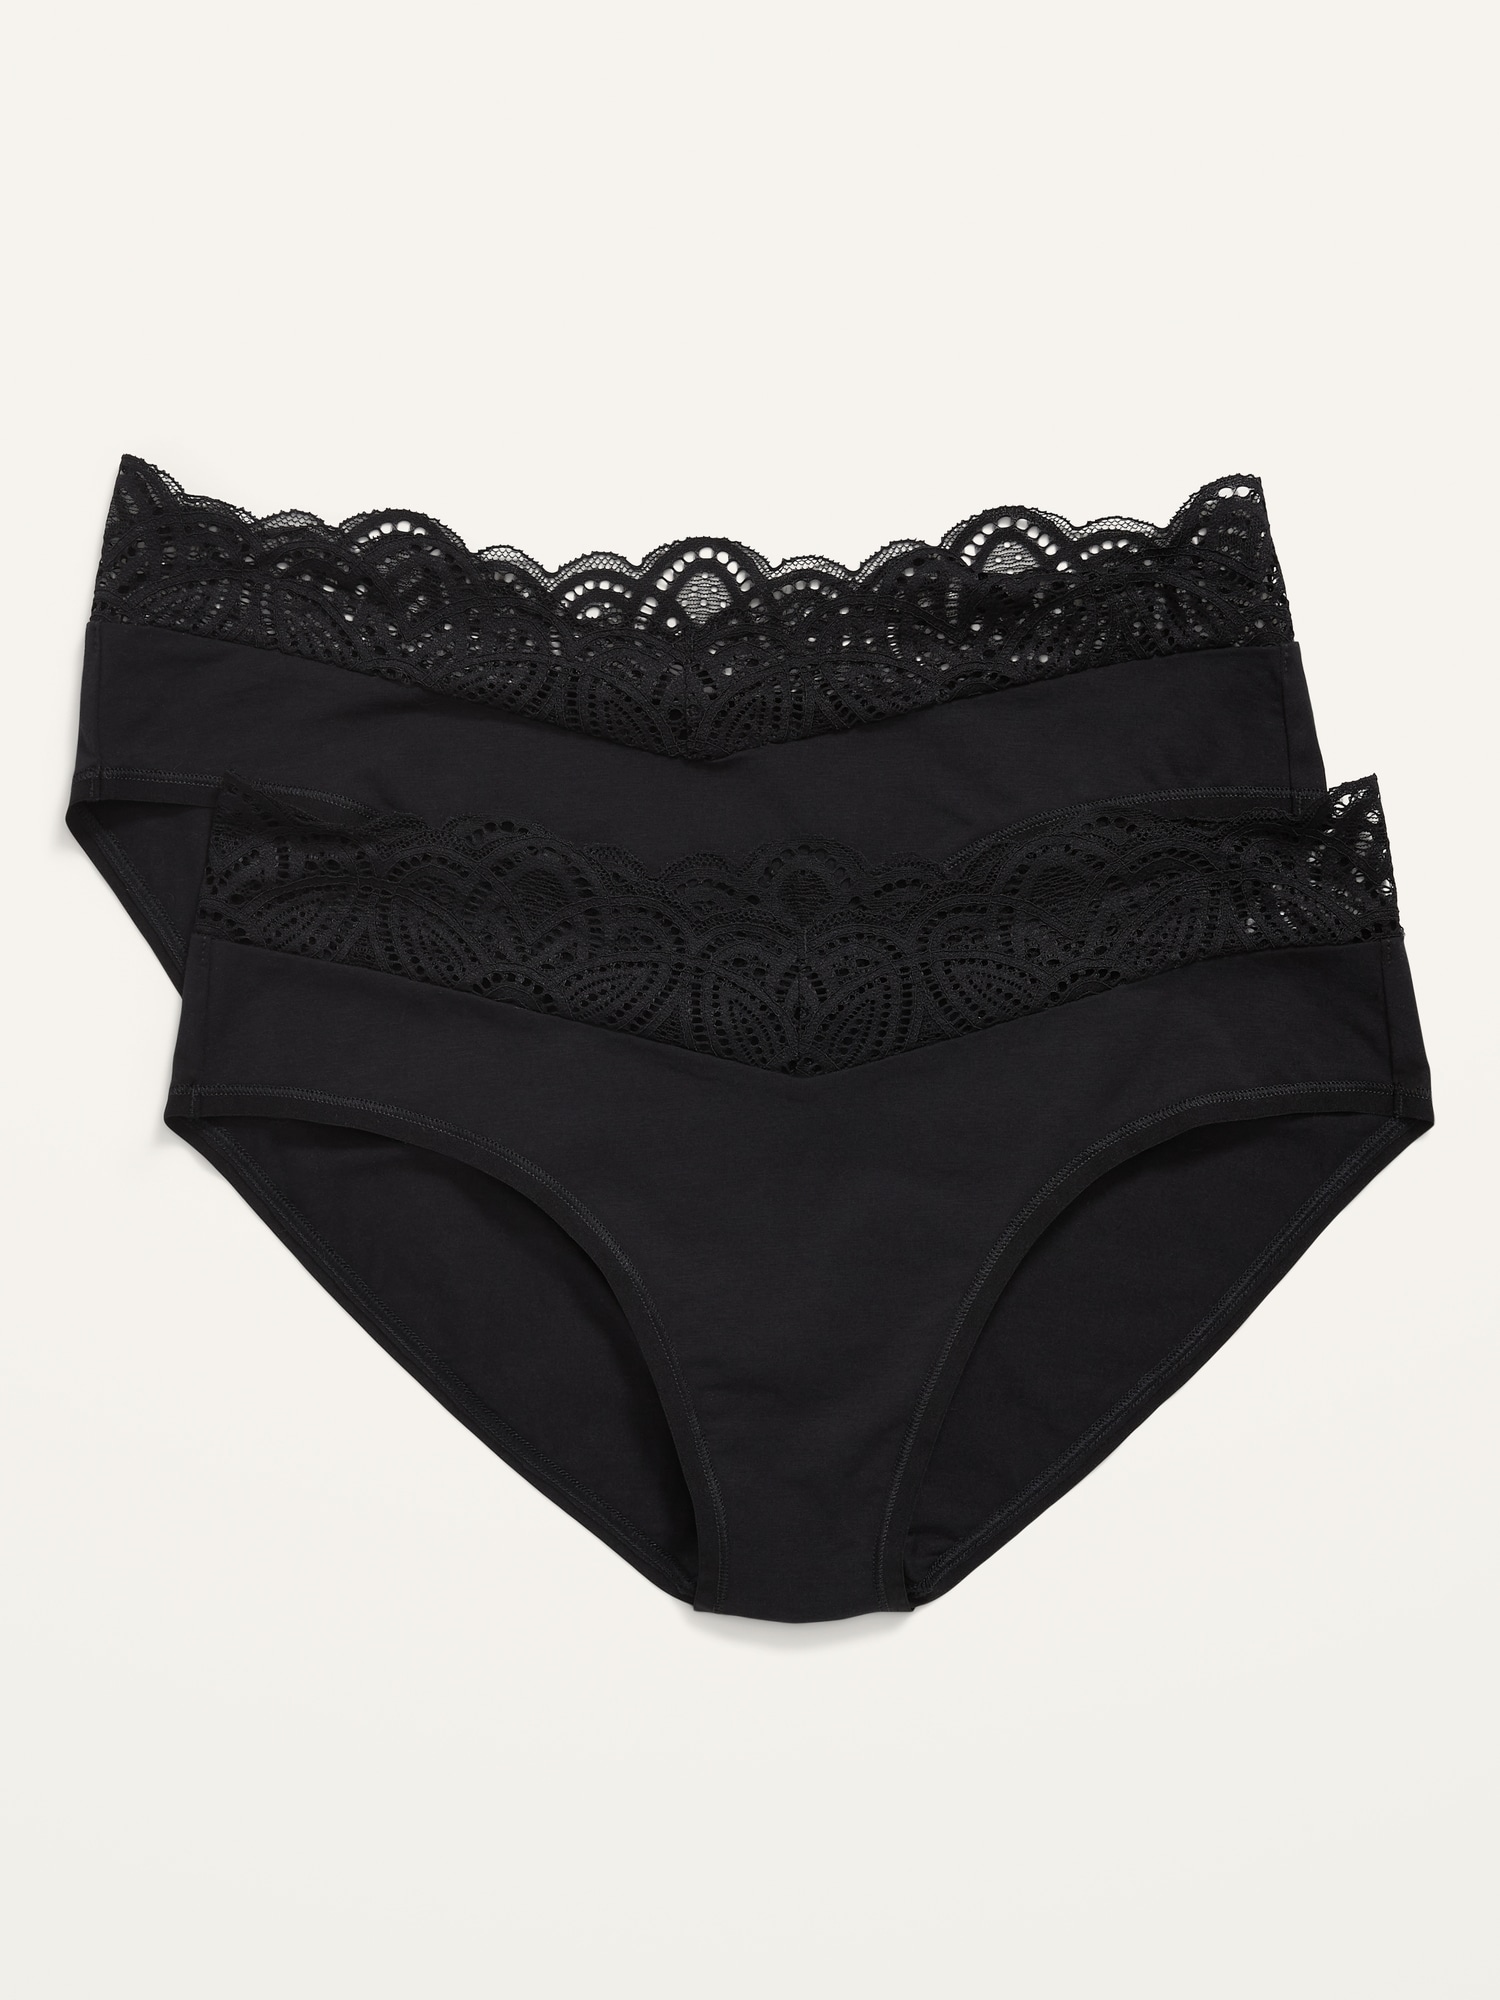 Buy Bambody Absorbent Bikini: Lace Hip Period Panties  Women's Protective  Underwear, 2 Pack: Black + Black, X-Small at